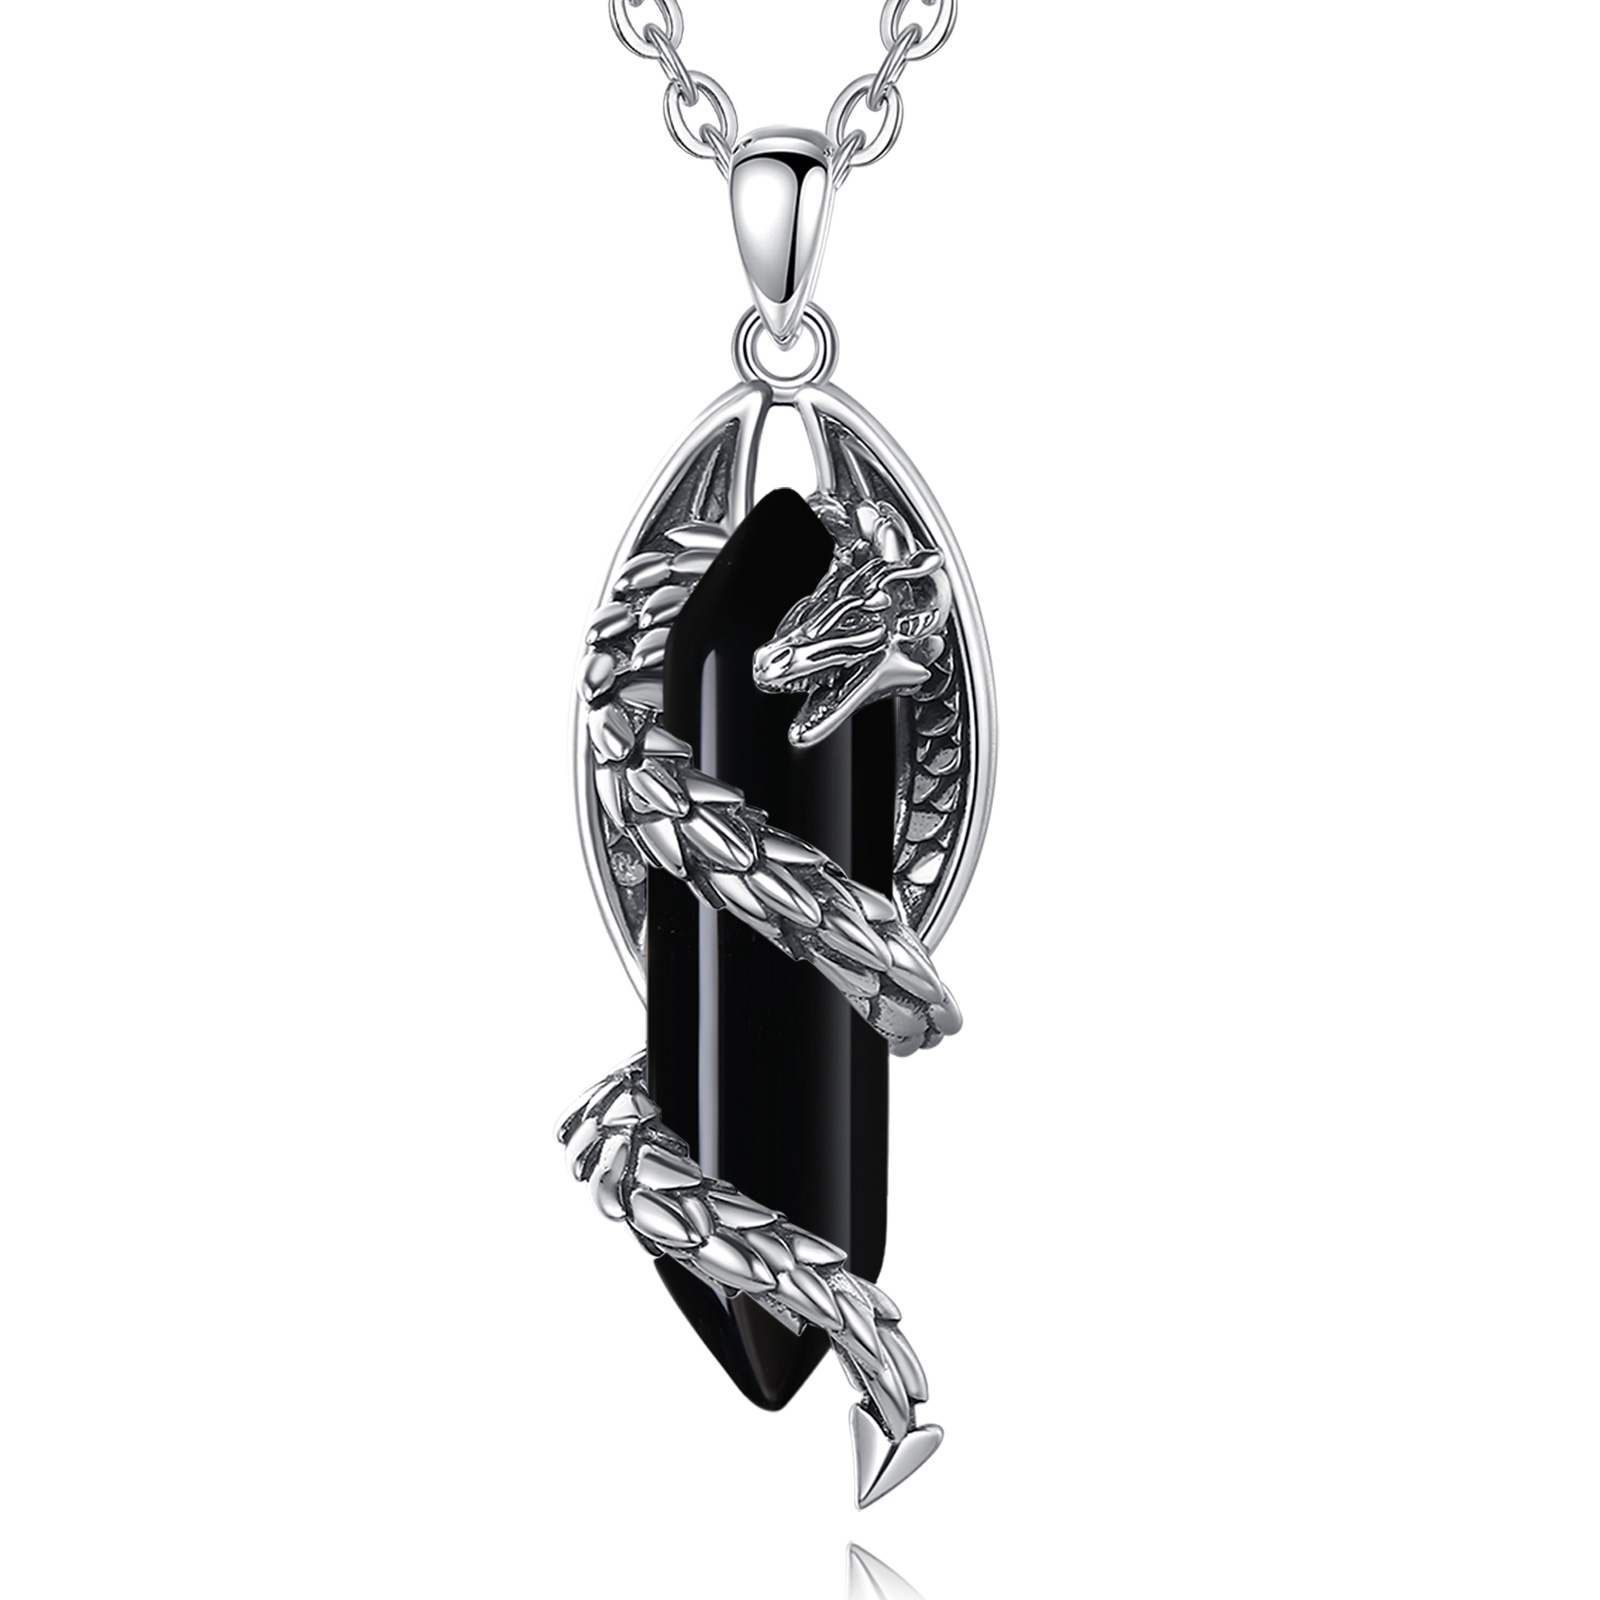 Merryshine 925 sterling silver hexagonal pointed shaped dragon design natural crystal stone black obsidian pendant necklace